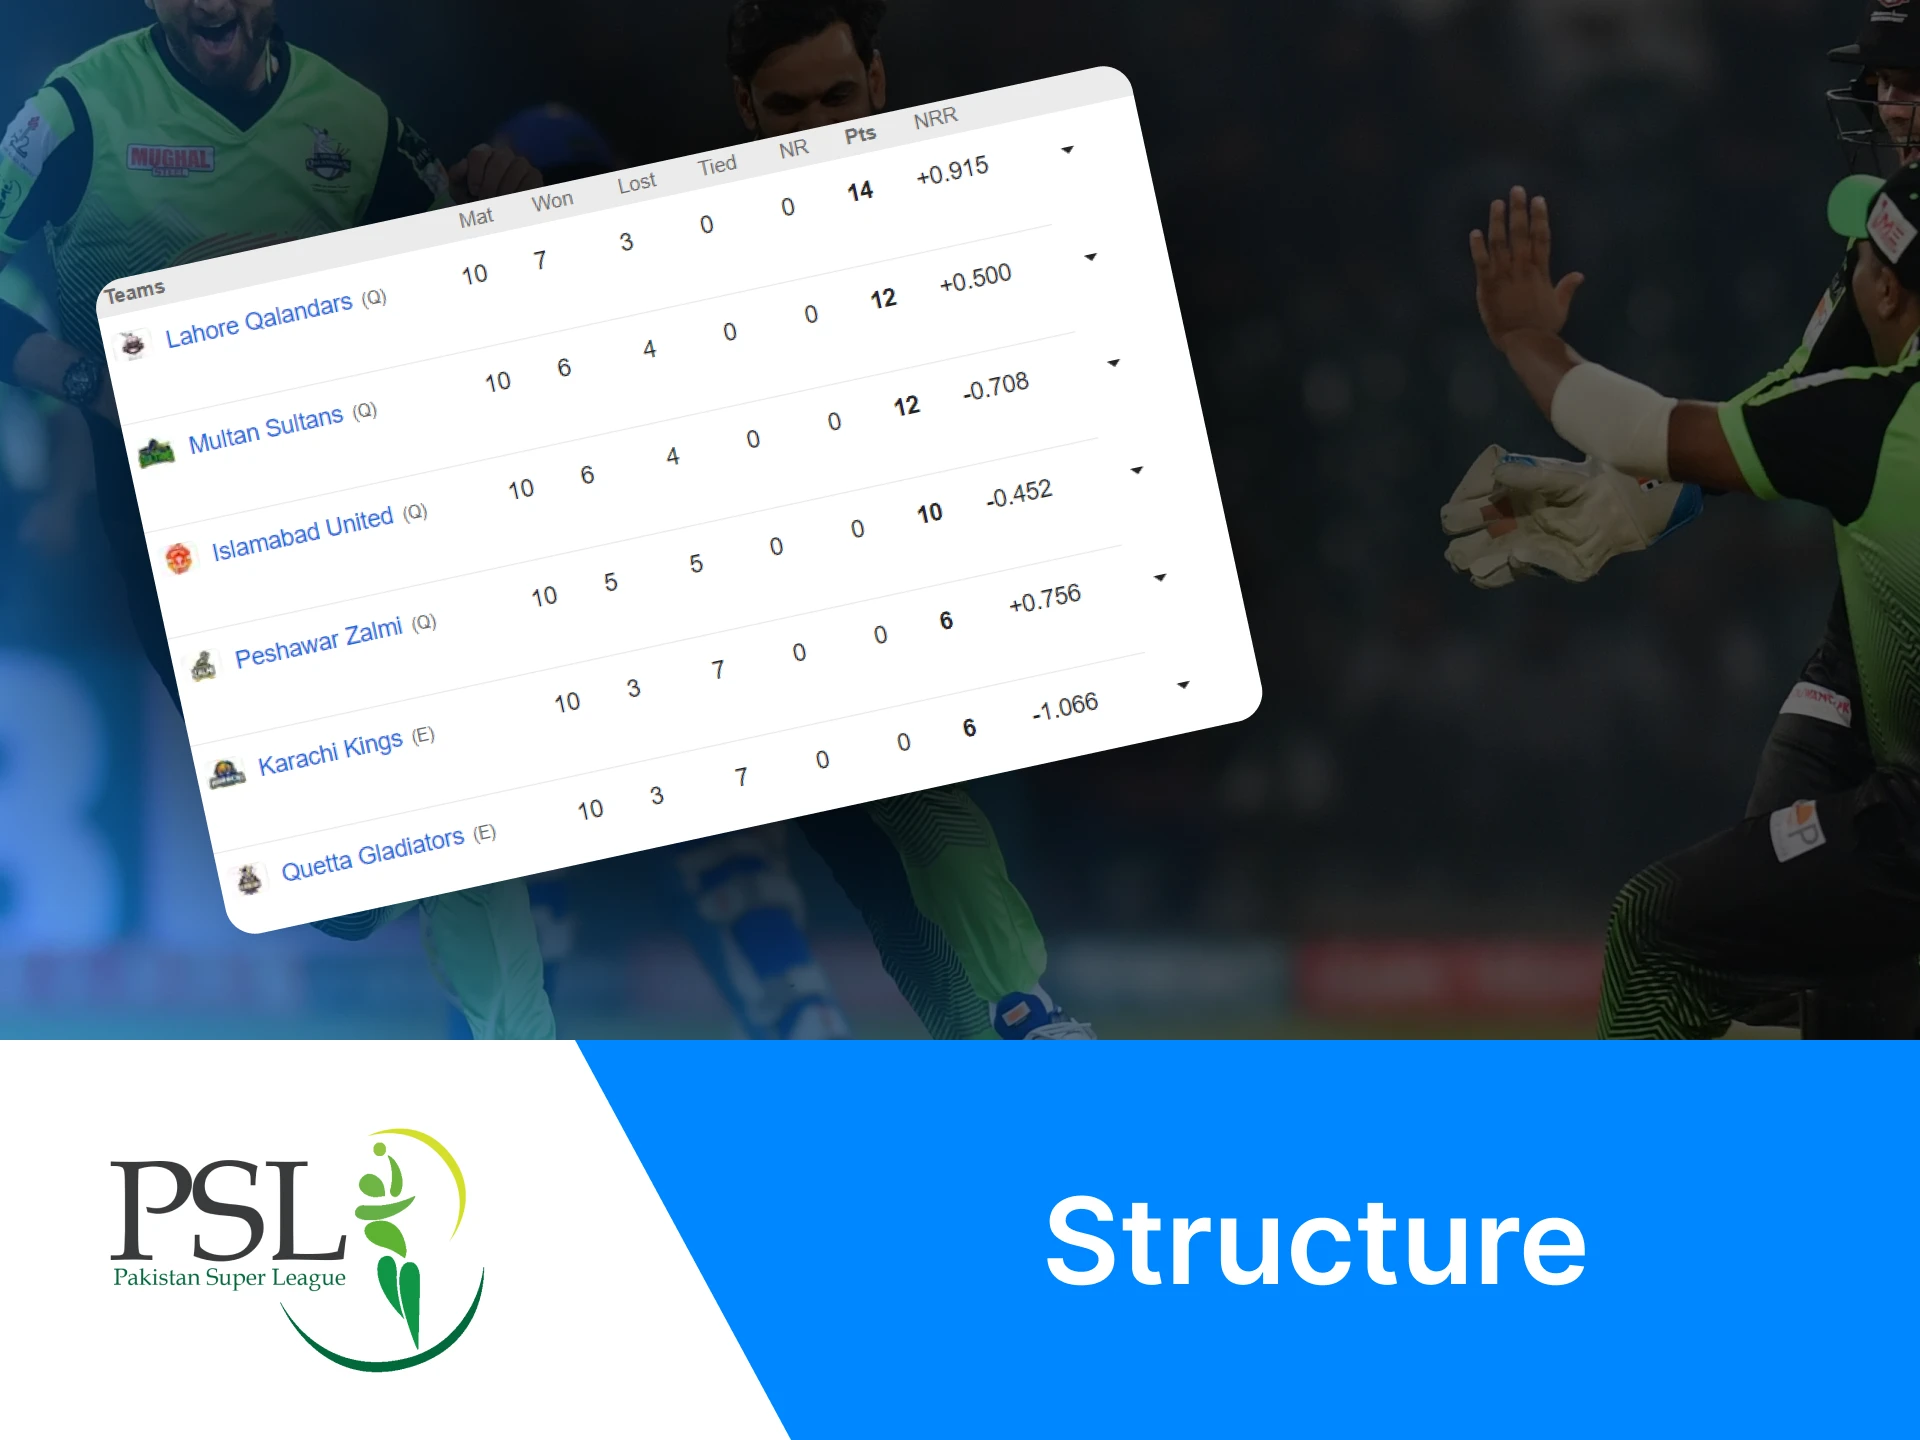 PSL has a specific structure like any tournament.